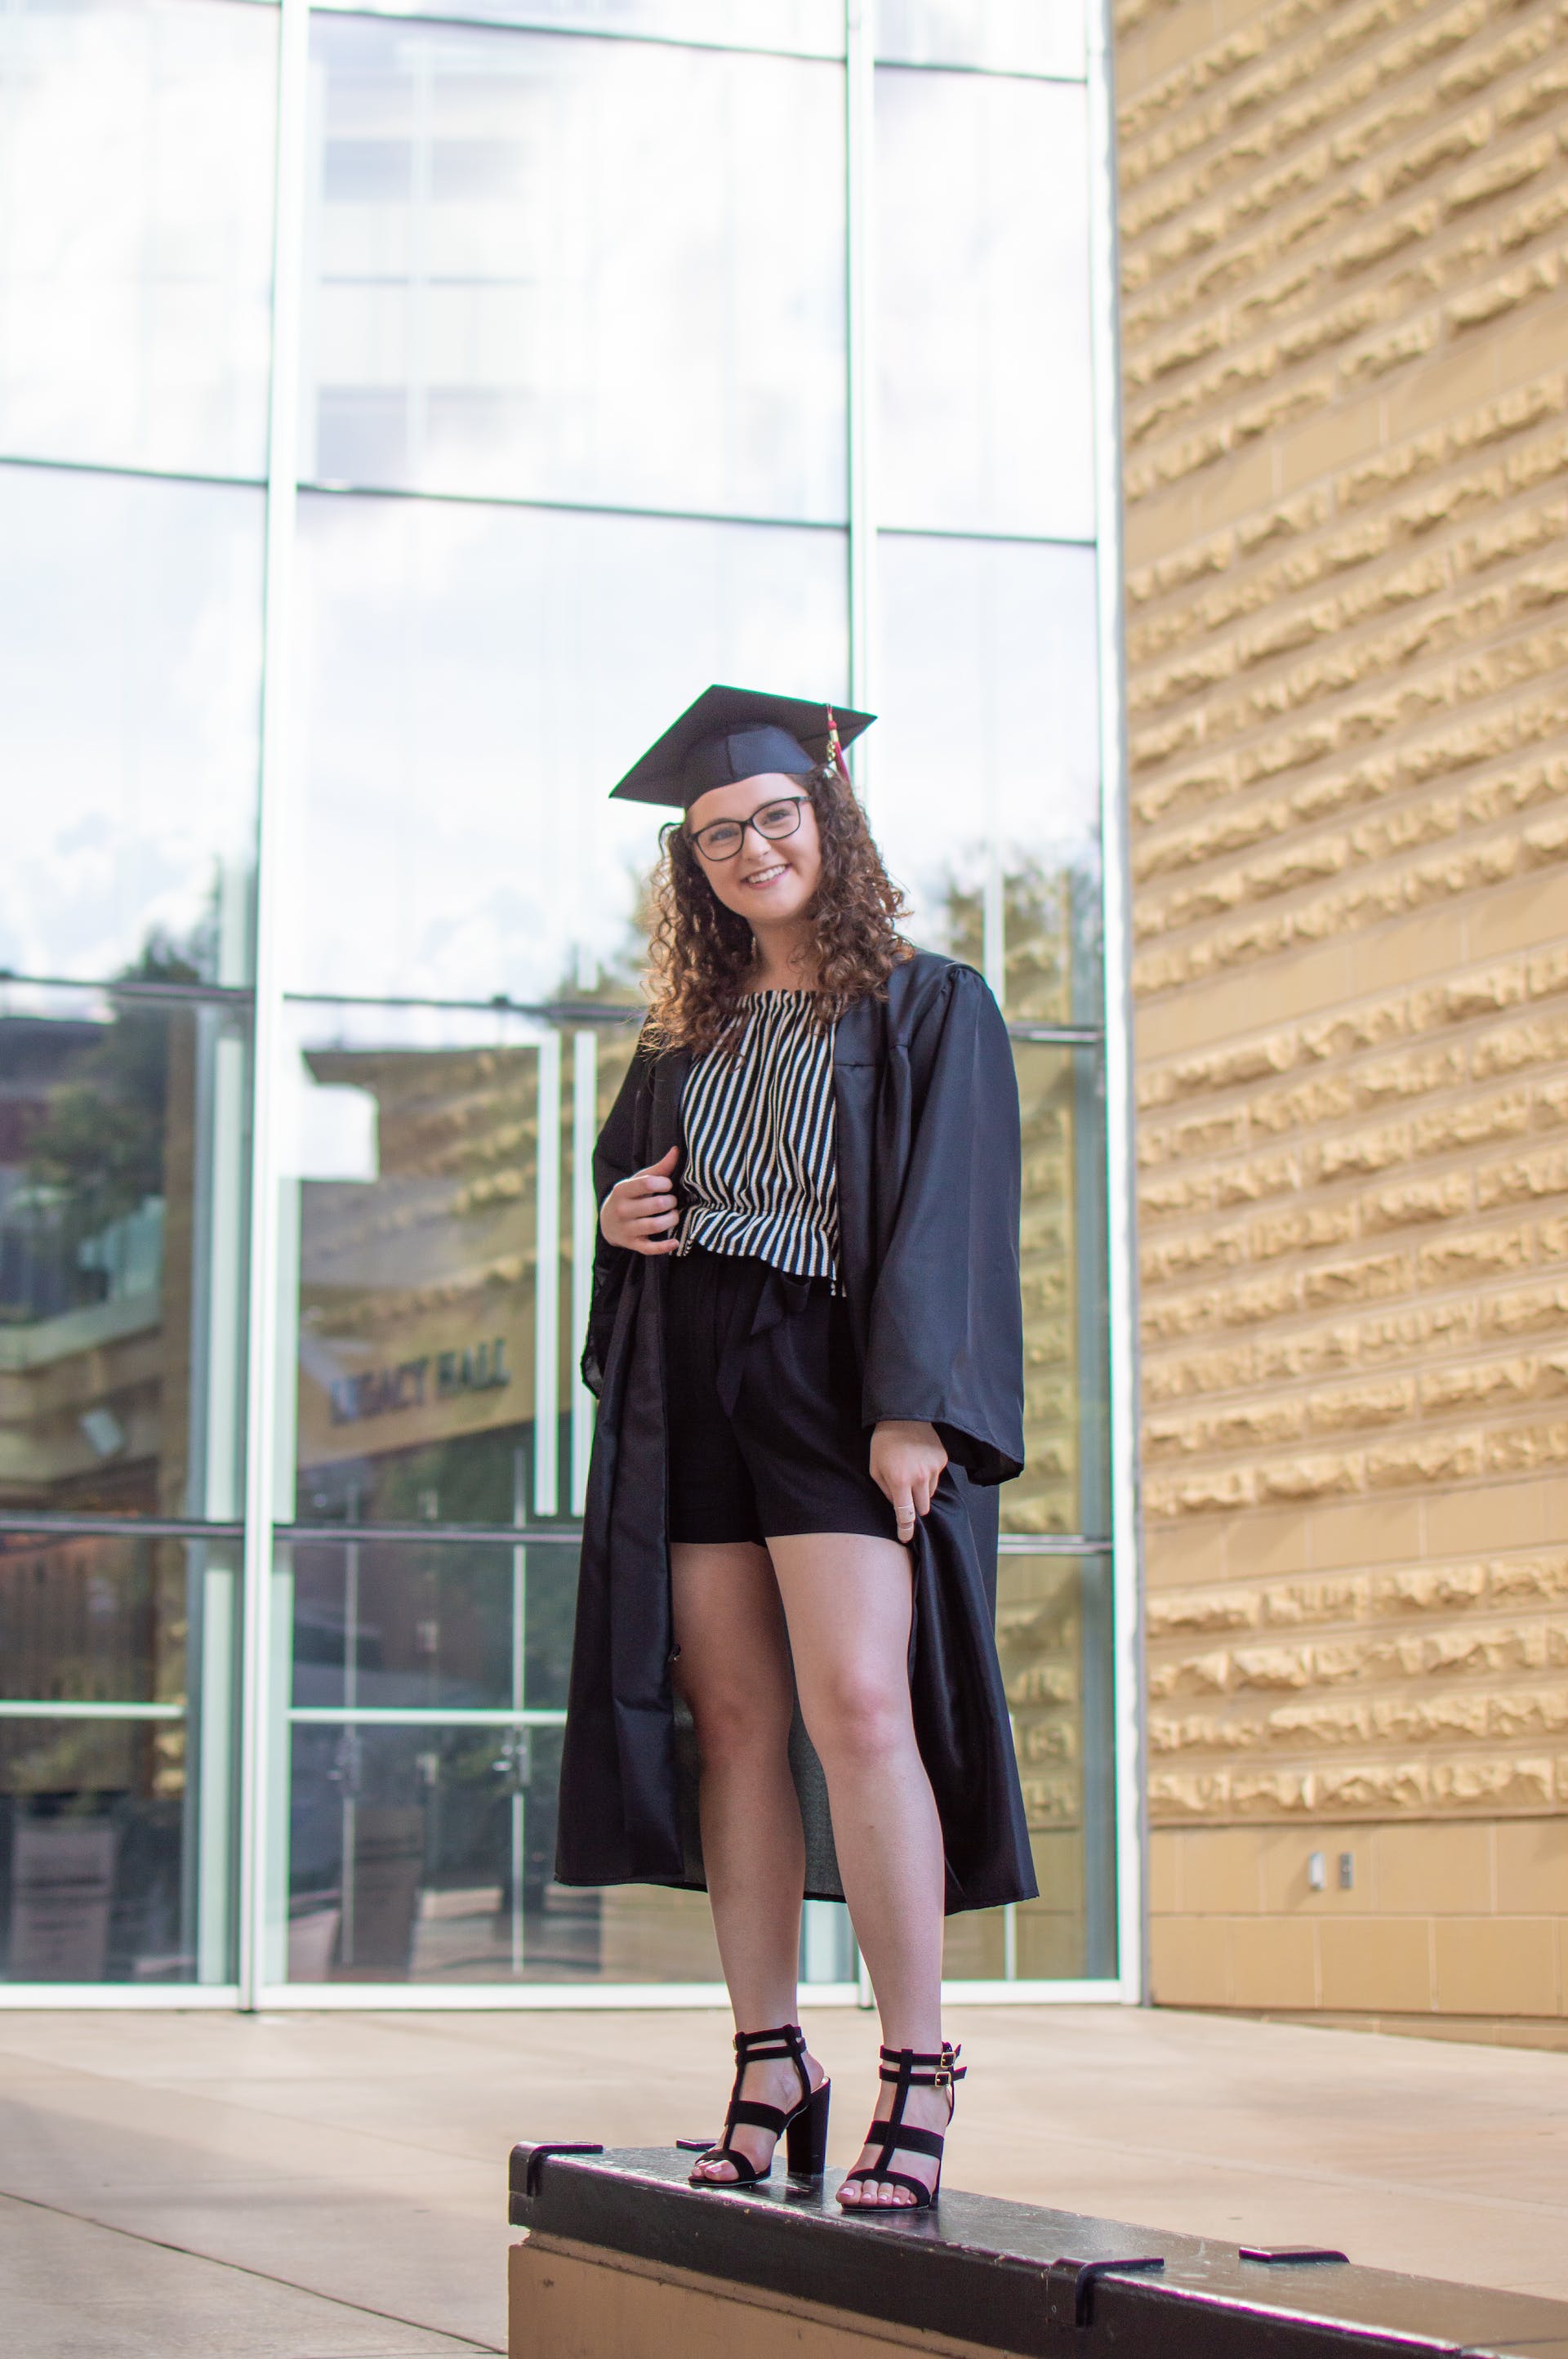 A young woman in graduation gown | Source: Pexels